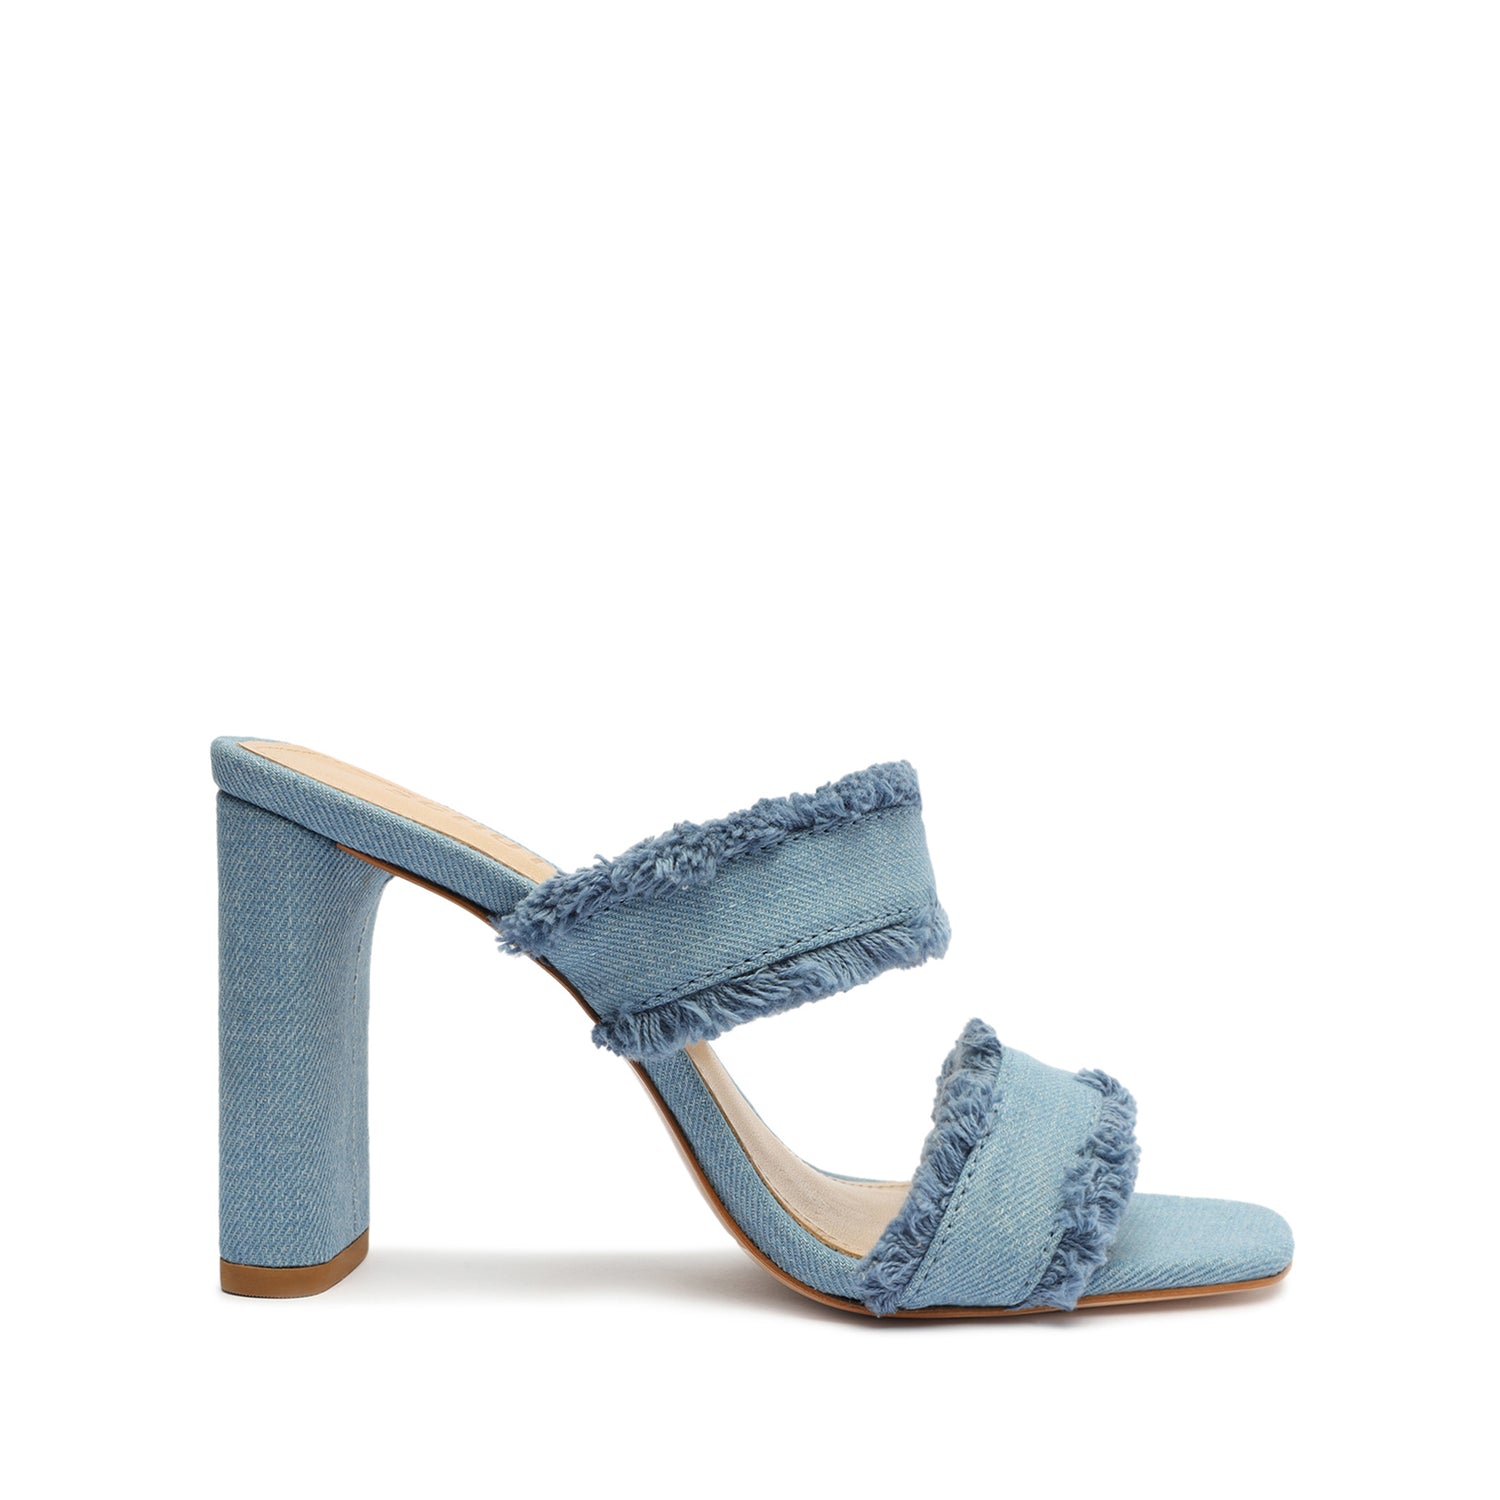 Amely Fabric Sandal Sandals SPRING 24 5 Summer Jeans Fabric - Schutz Shoes